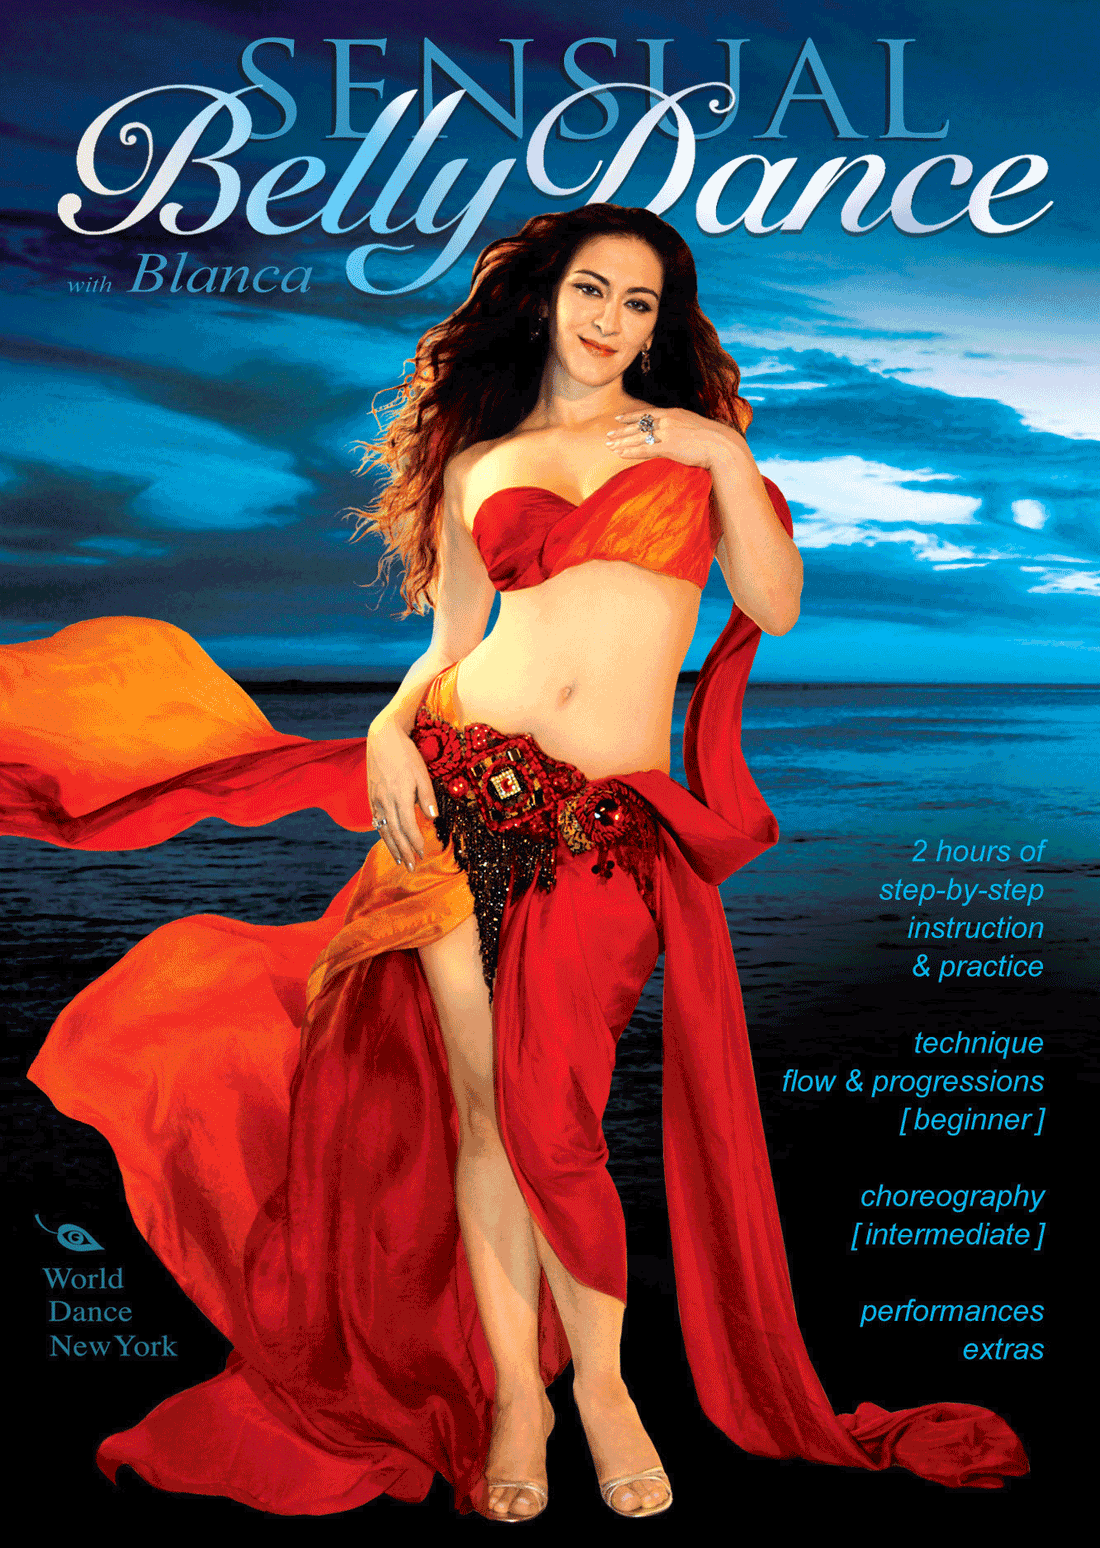 Sensual Belly Dance for beginners, with Blanca  - INSTANT VIDEO / DVD - World Dance New York